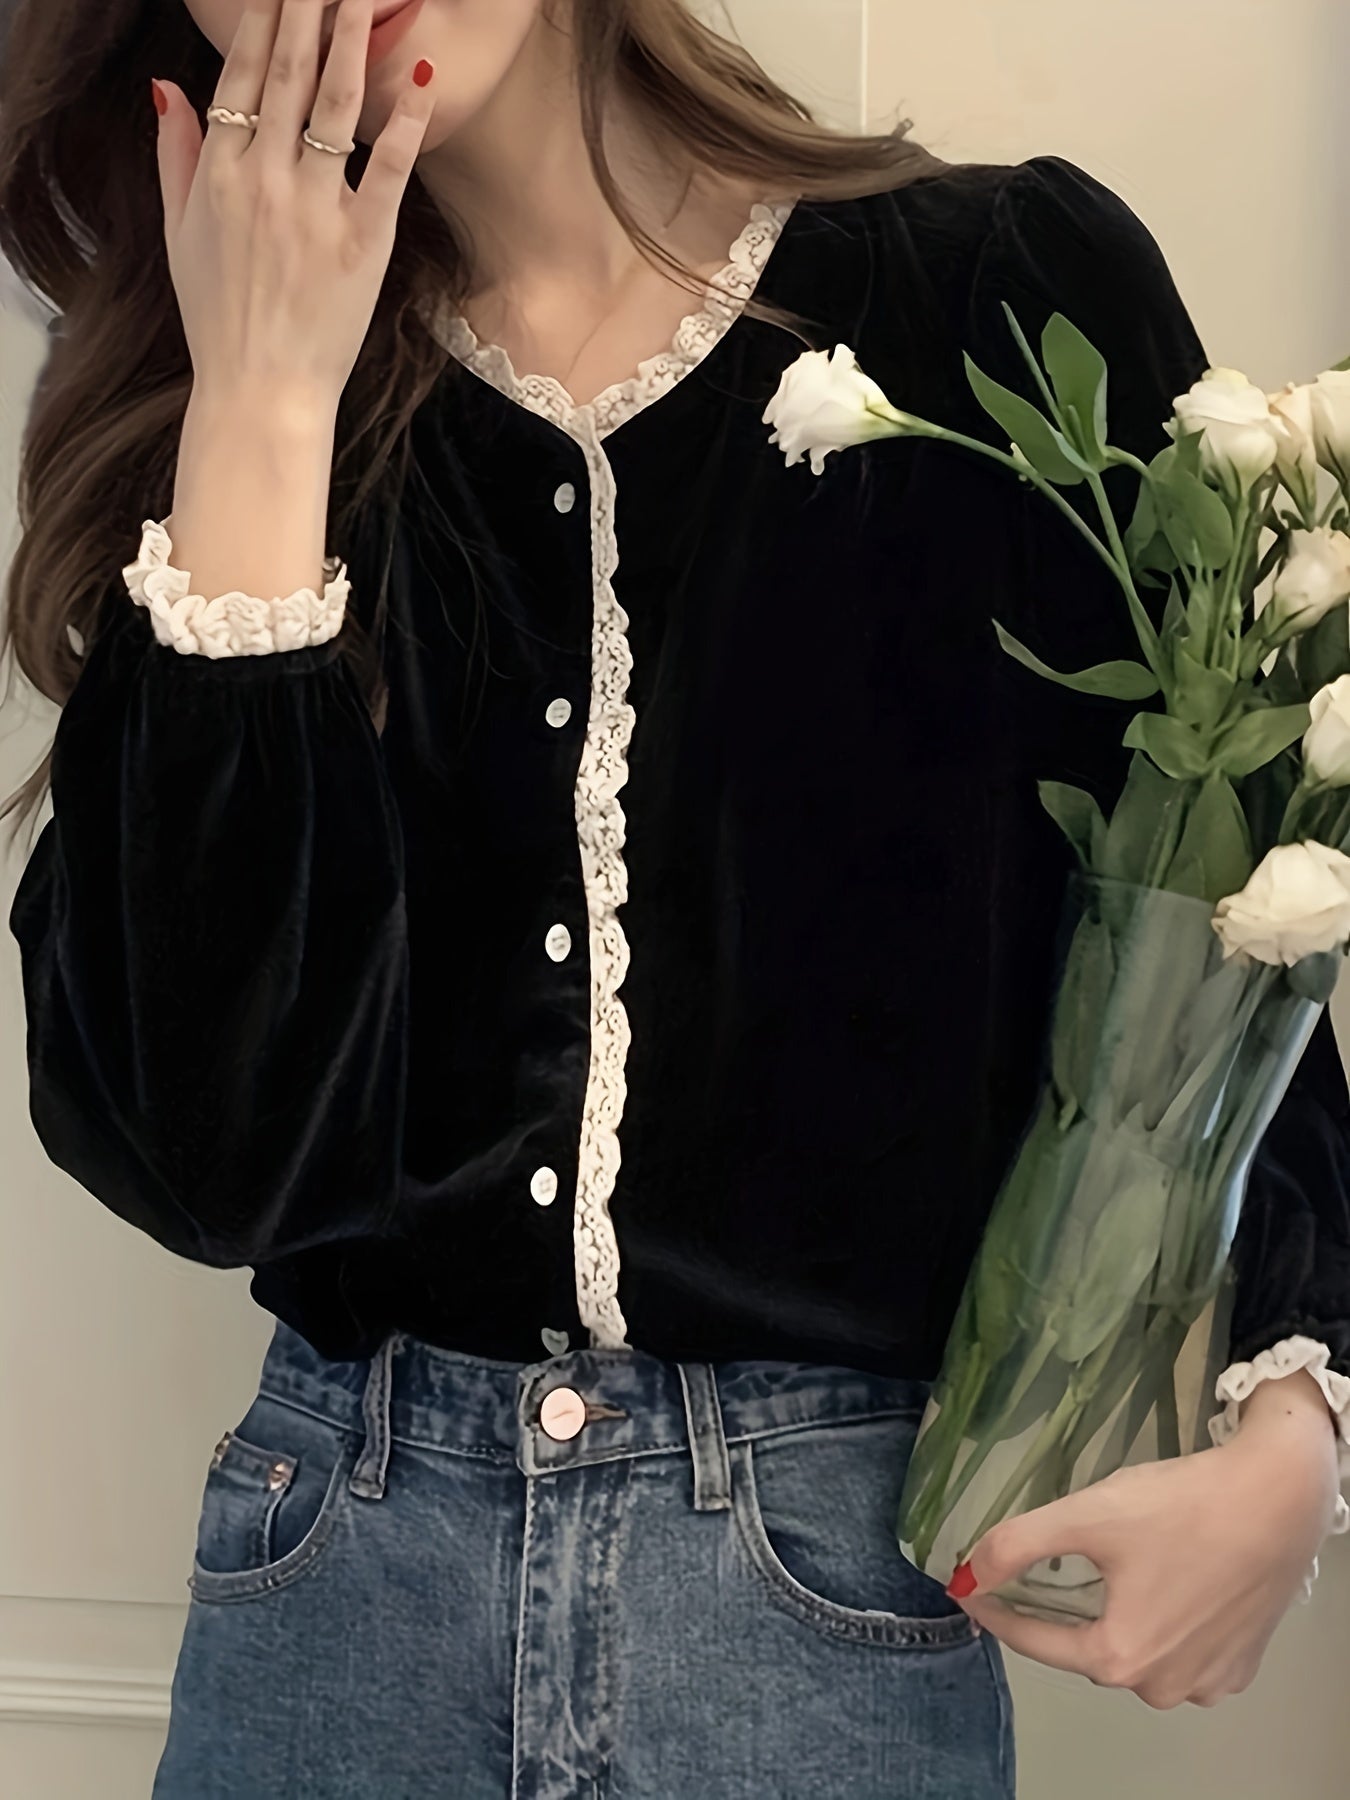 Vzyzv Lace Stitching V-neck Velvet Blouse, Vintage Long Sleeve Button Front Blouse For Spring & Fall, Women's Clothing